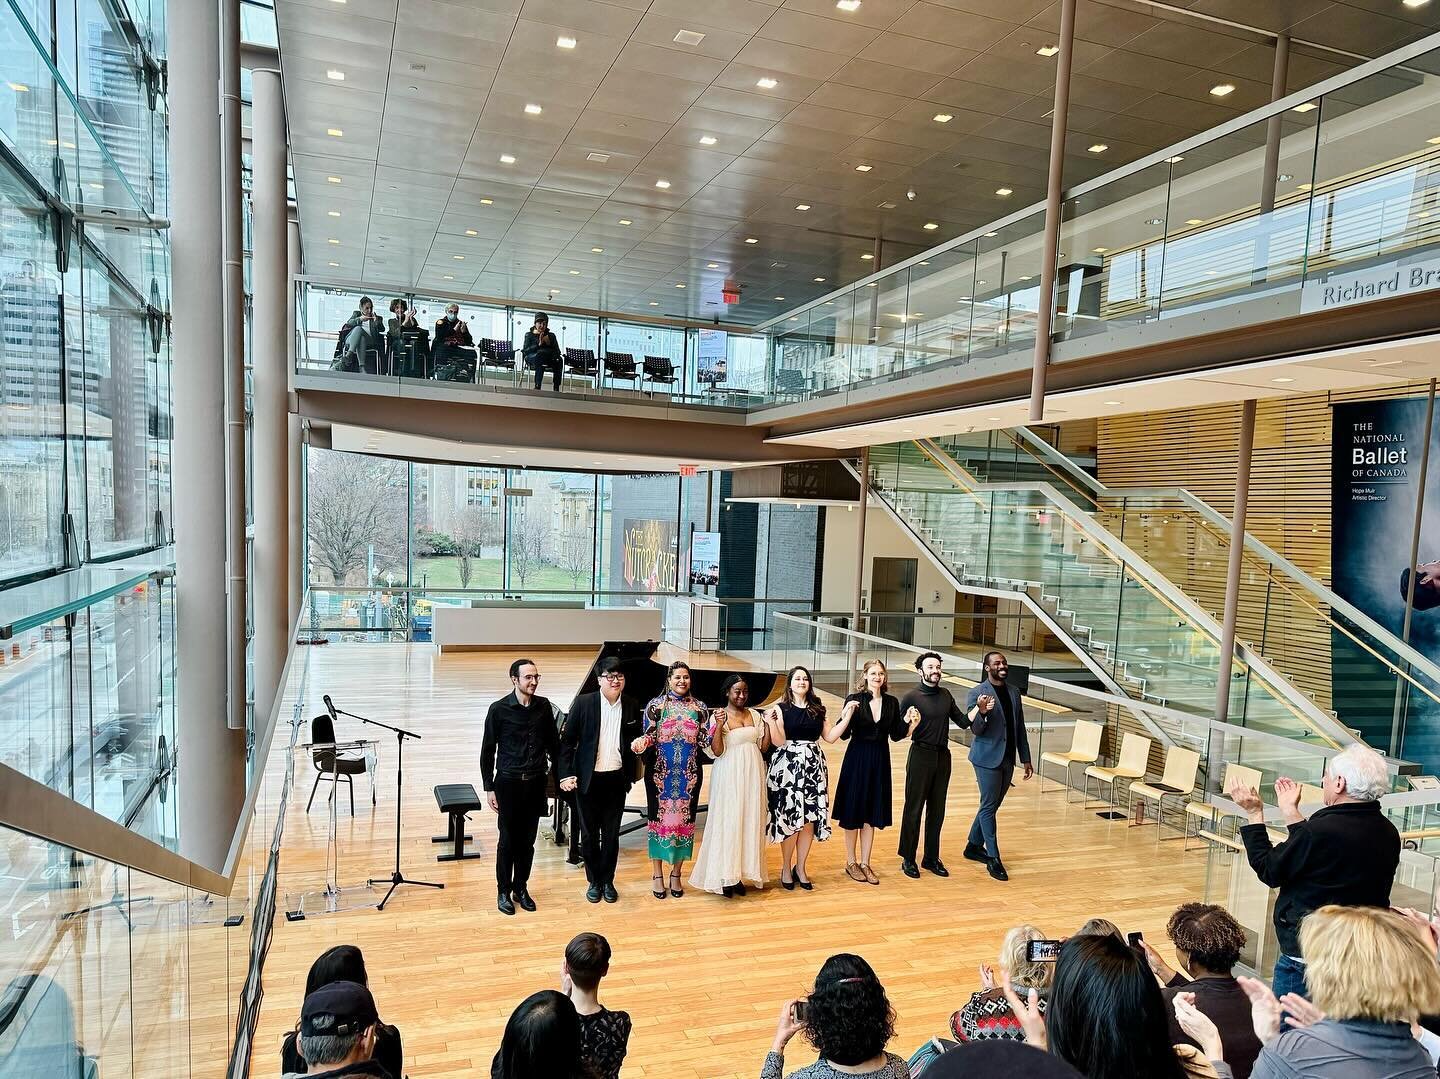 Today&rsquo;s concert in the @canadianopera Free Concert Series was artists of the Ensemble Studio performing the beautiful music of Composer-in-Residence @ceciliacomposer! 

Congratulations all!! 

#FreeConcertSeries
#COCEnsemble